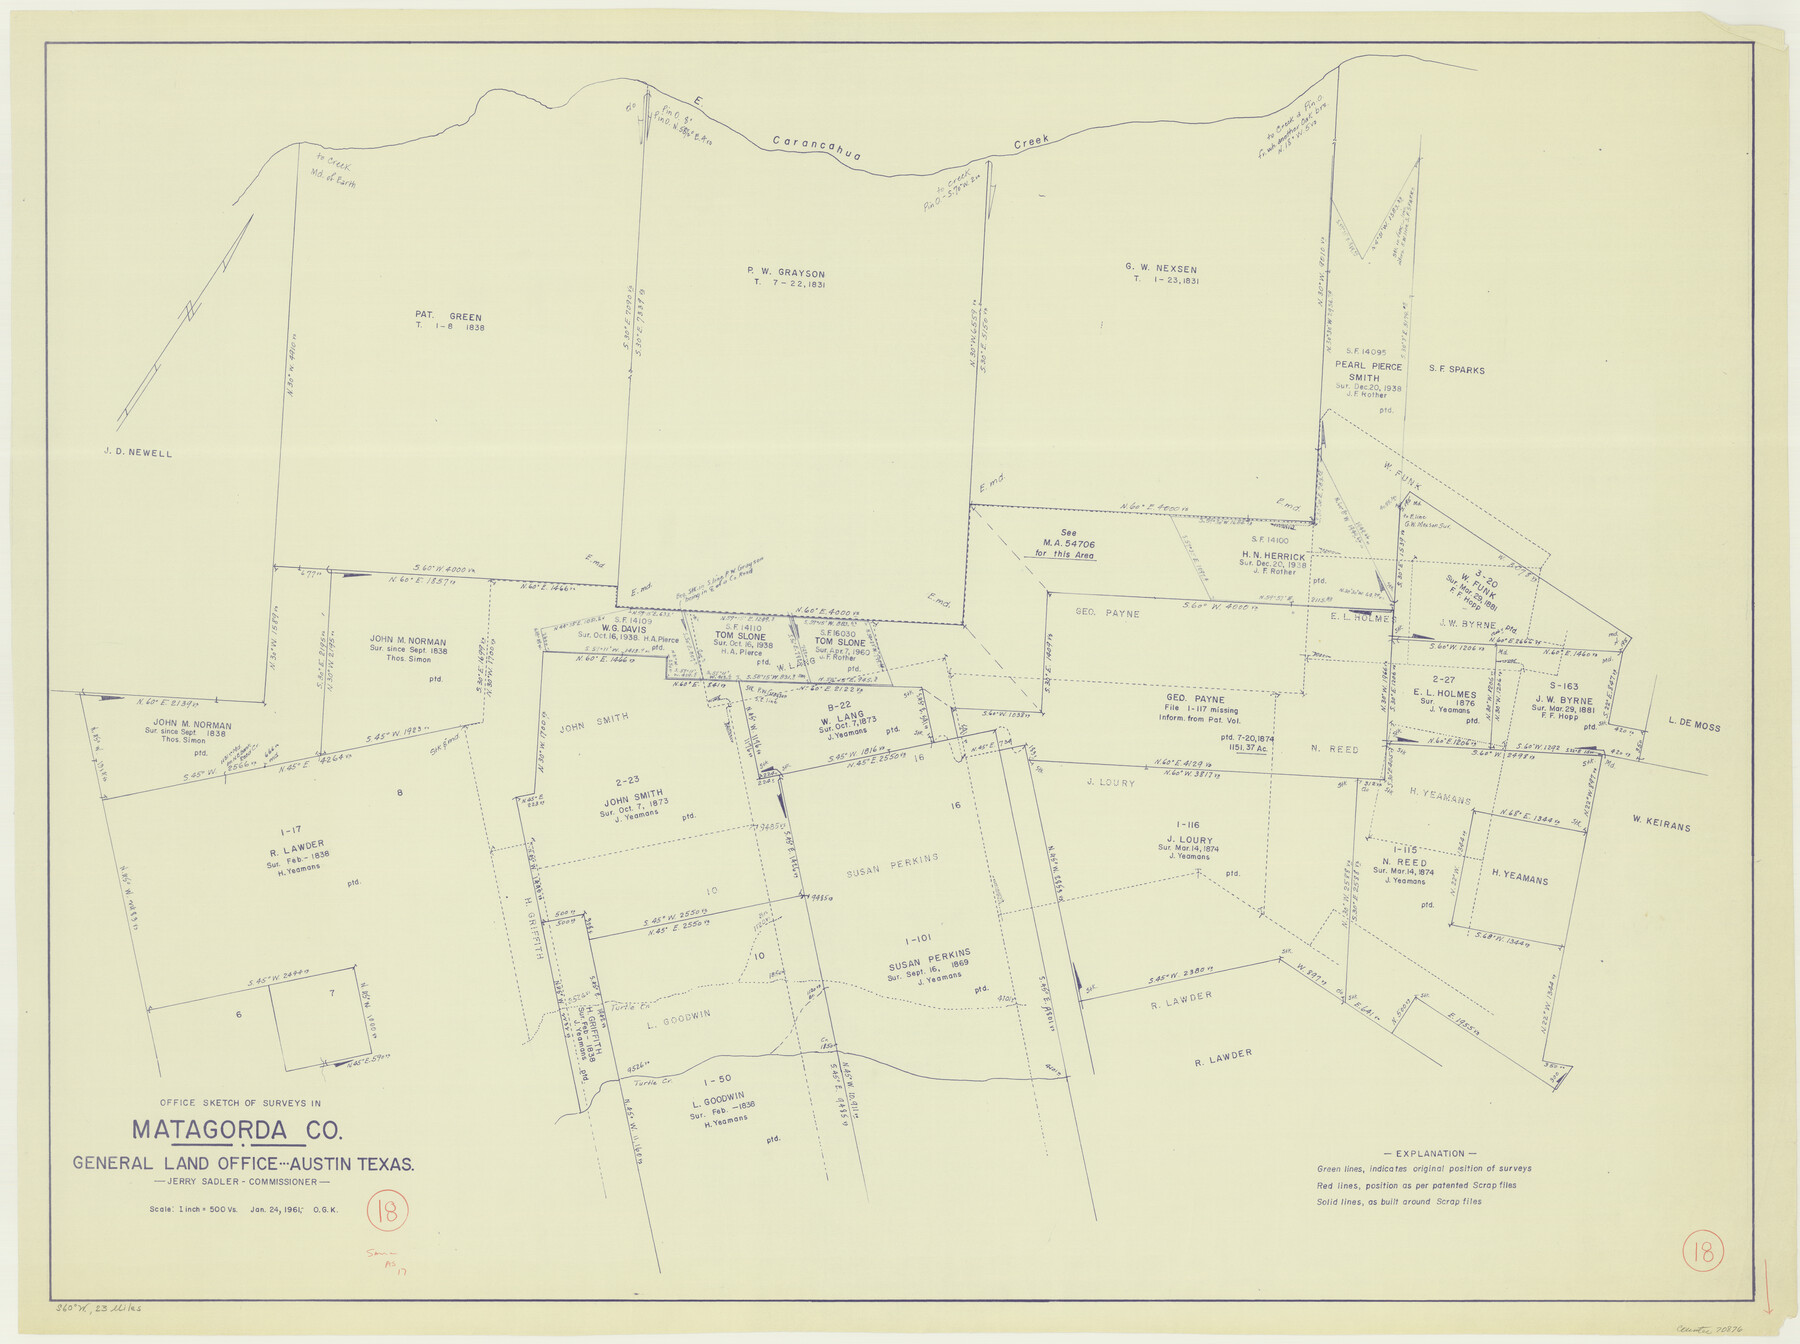 70876, Matagorda County Working Sketch 18, General Map Collection